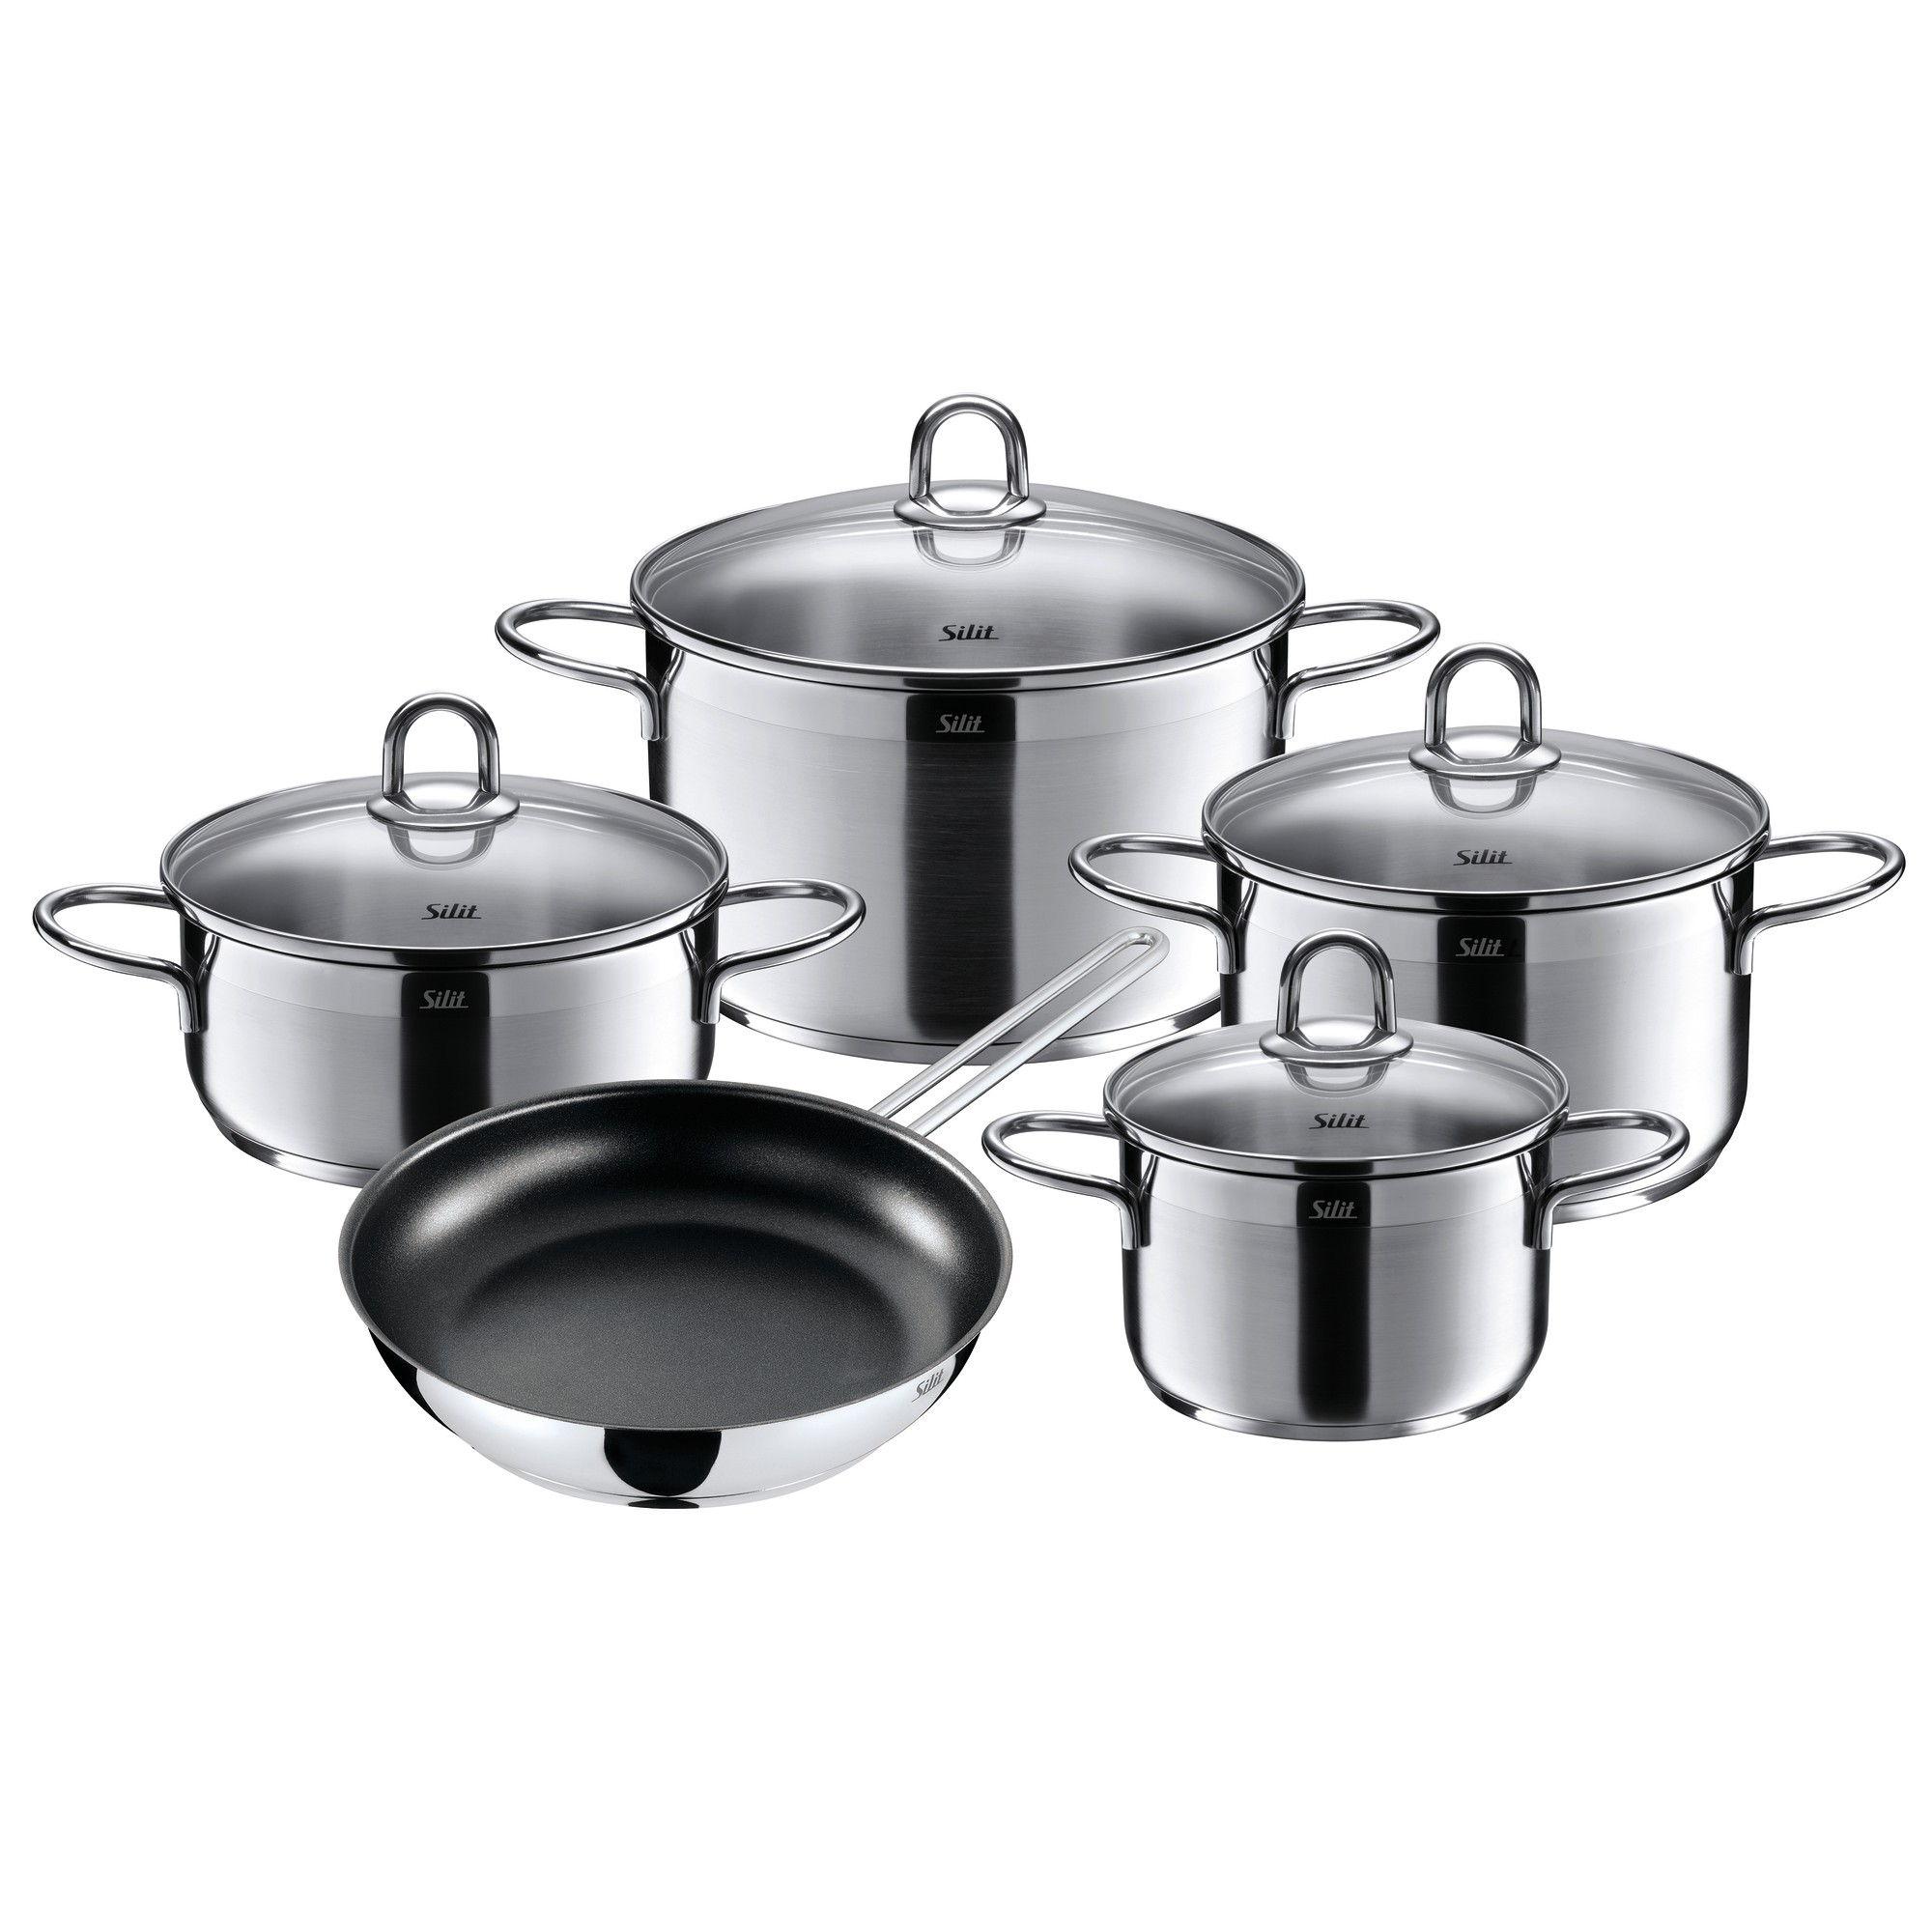 Tavolashop.com: WMF Cookware Set with a Free Frying Pan, Get the Offer!